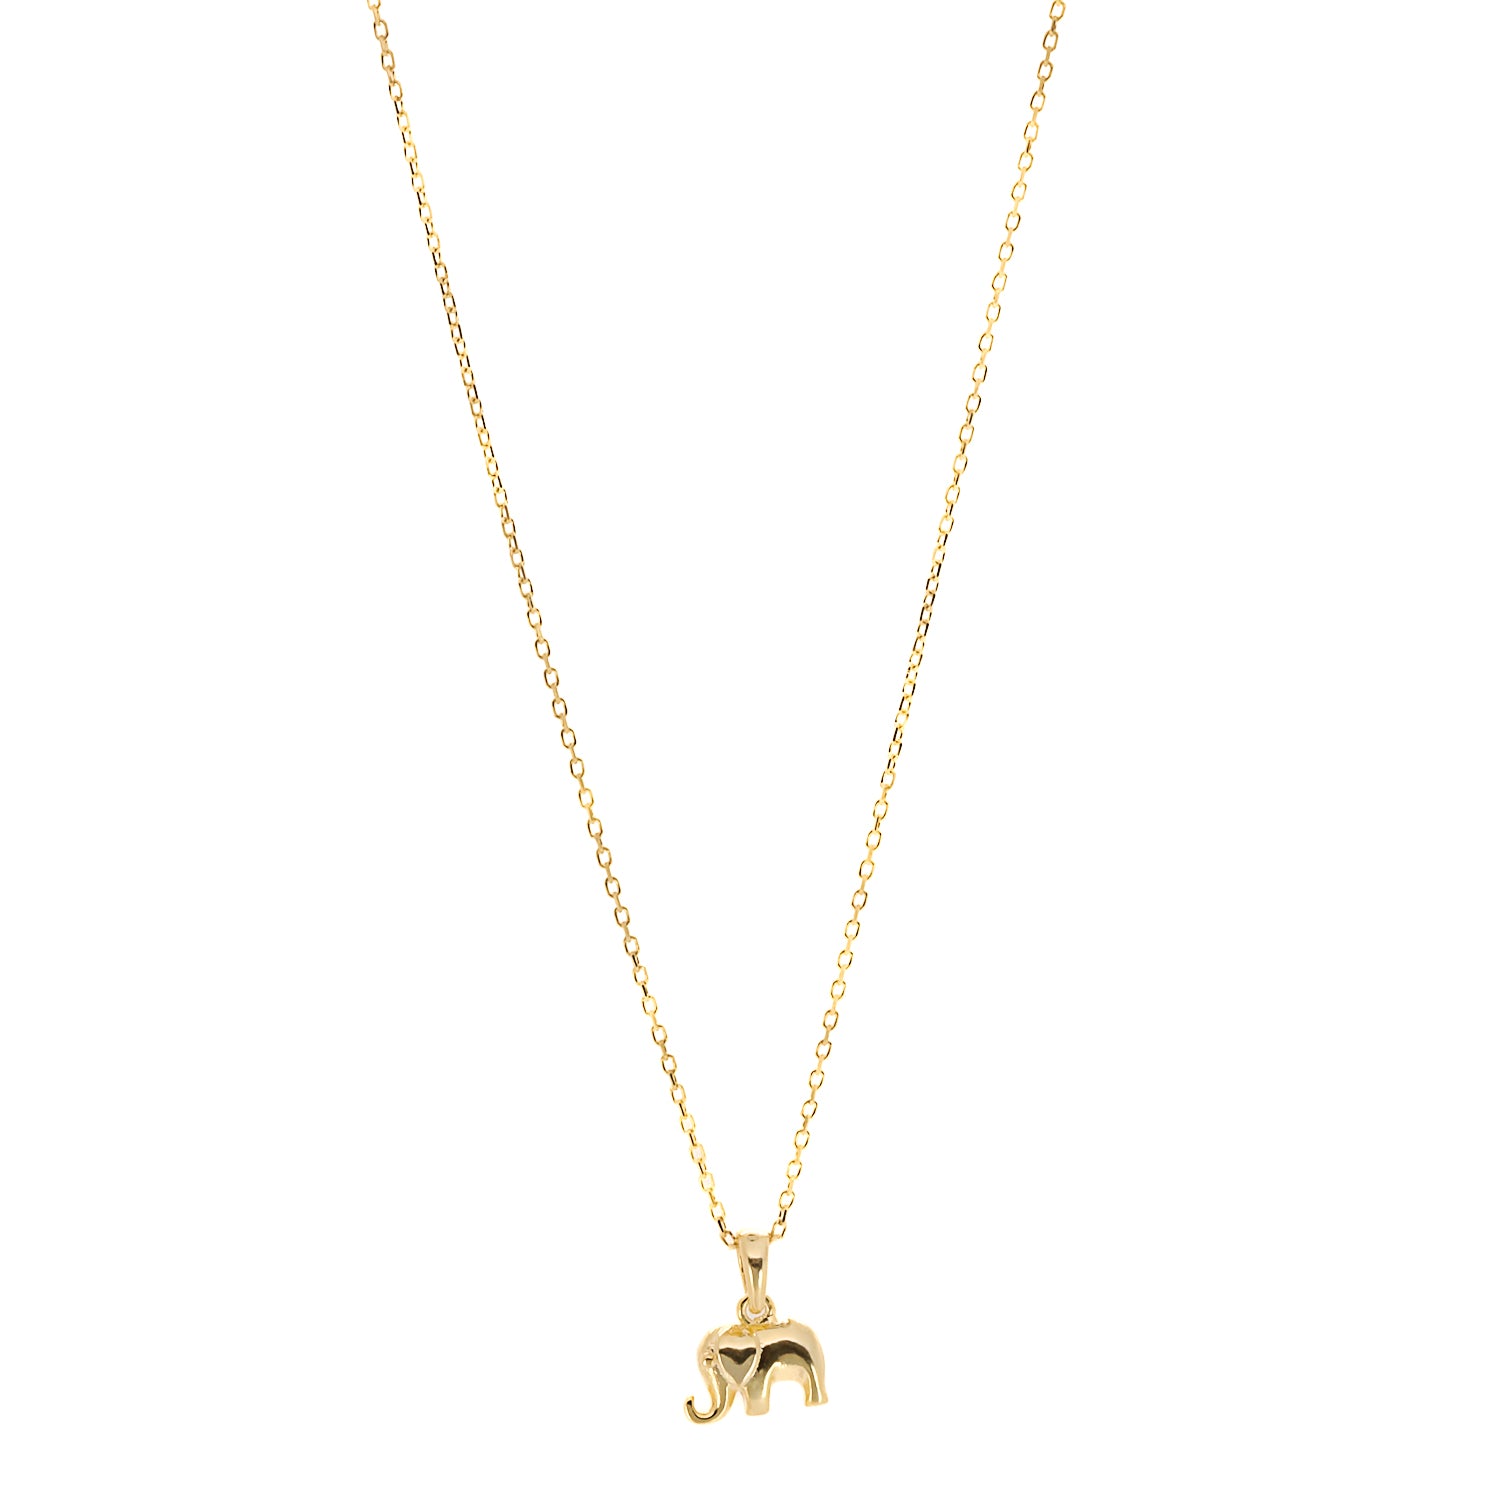 The captivating Dainty Gold Elephant Necklace, a handcrafted masterpiece that combines sterling silver and 18K gold plating to create a delicate and symbolic piece of jewelry.